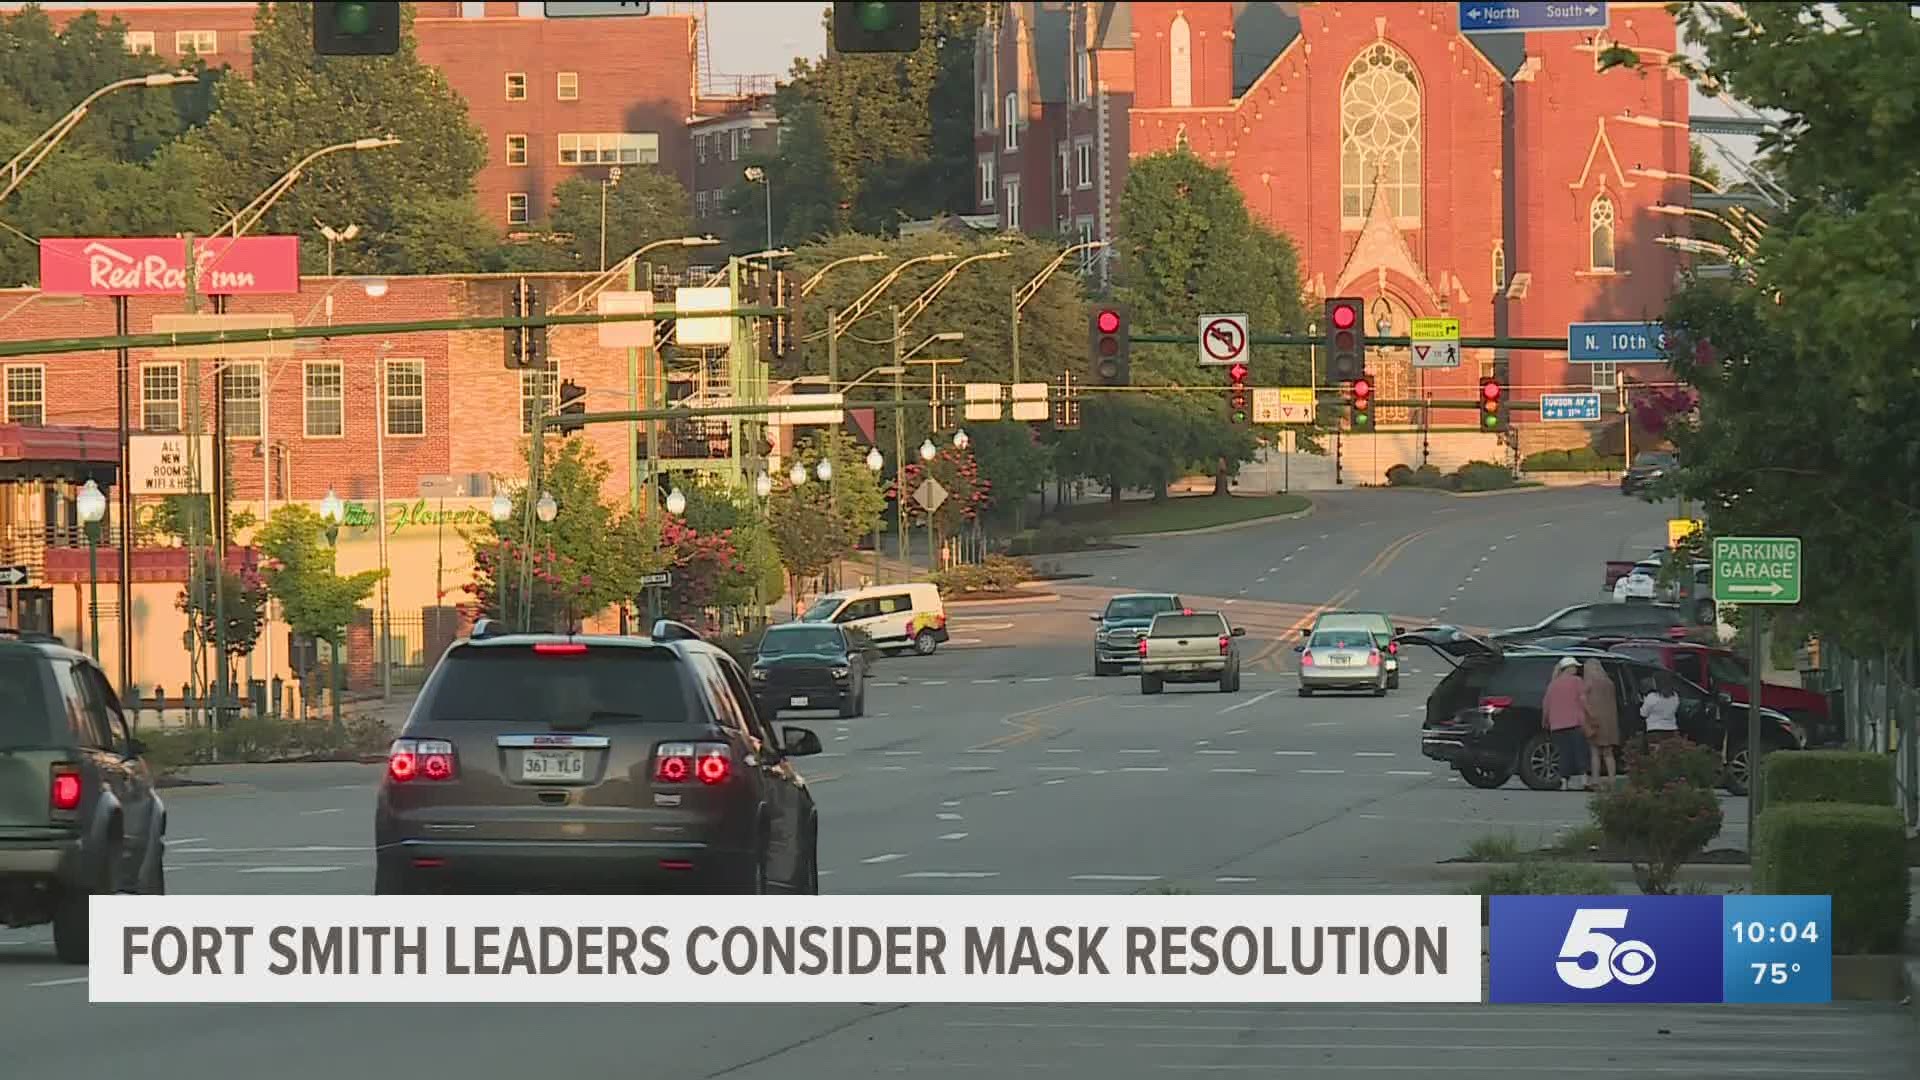 Fort Smith City leaders consider mask resolution